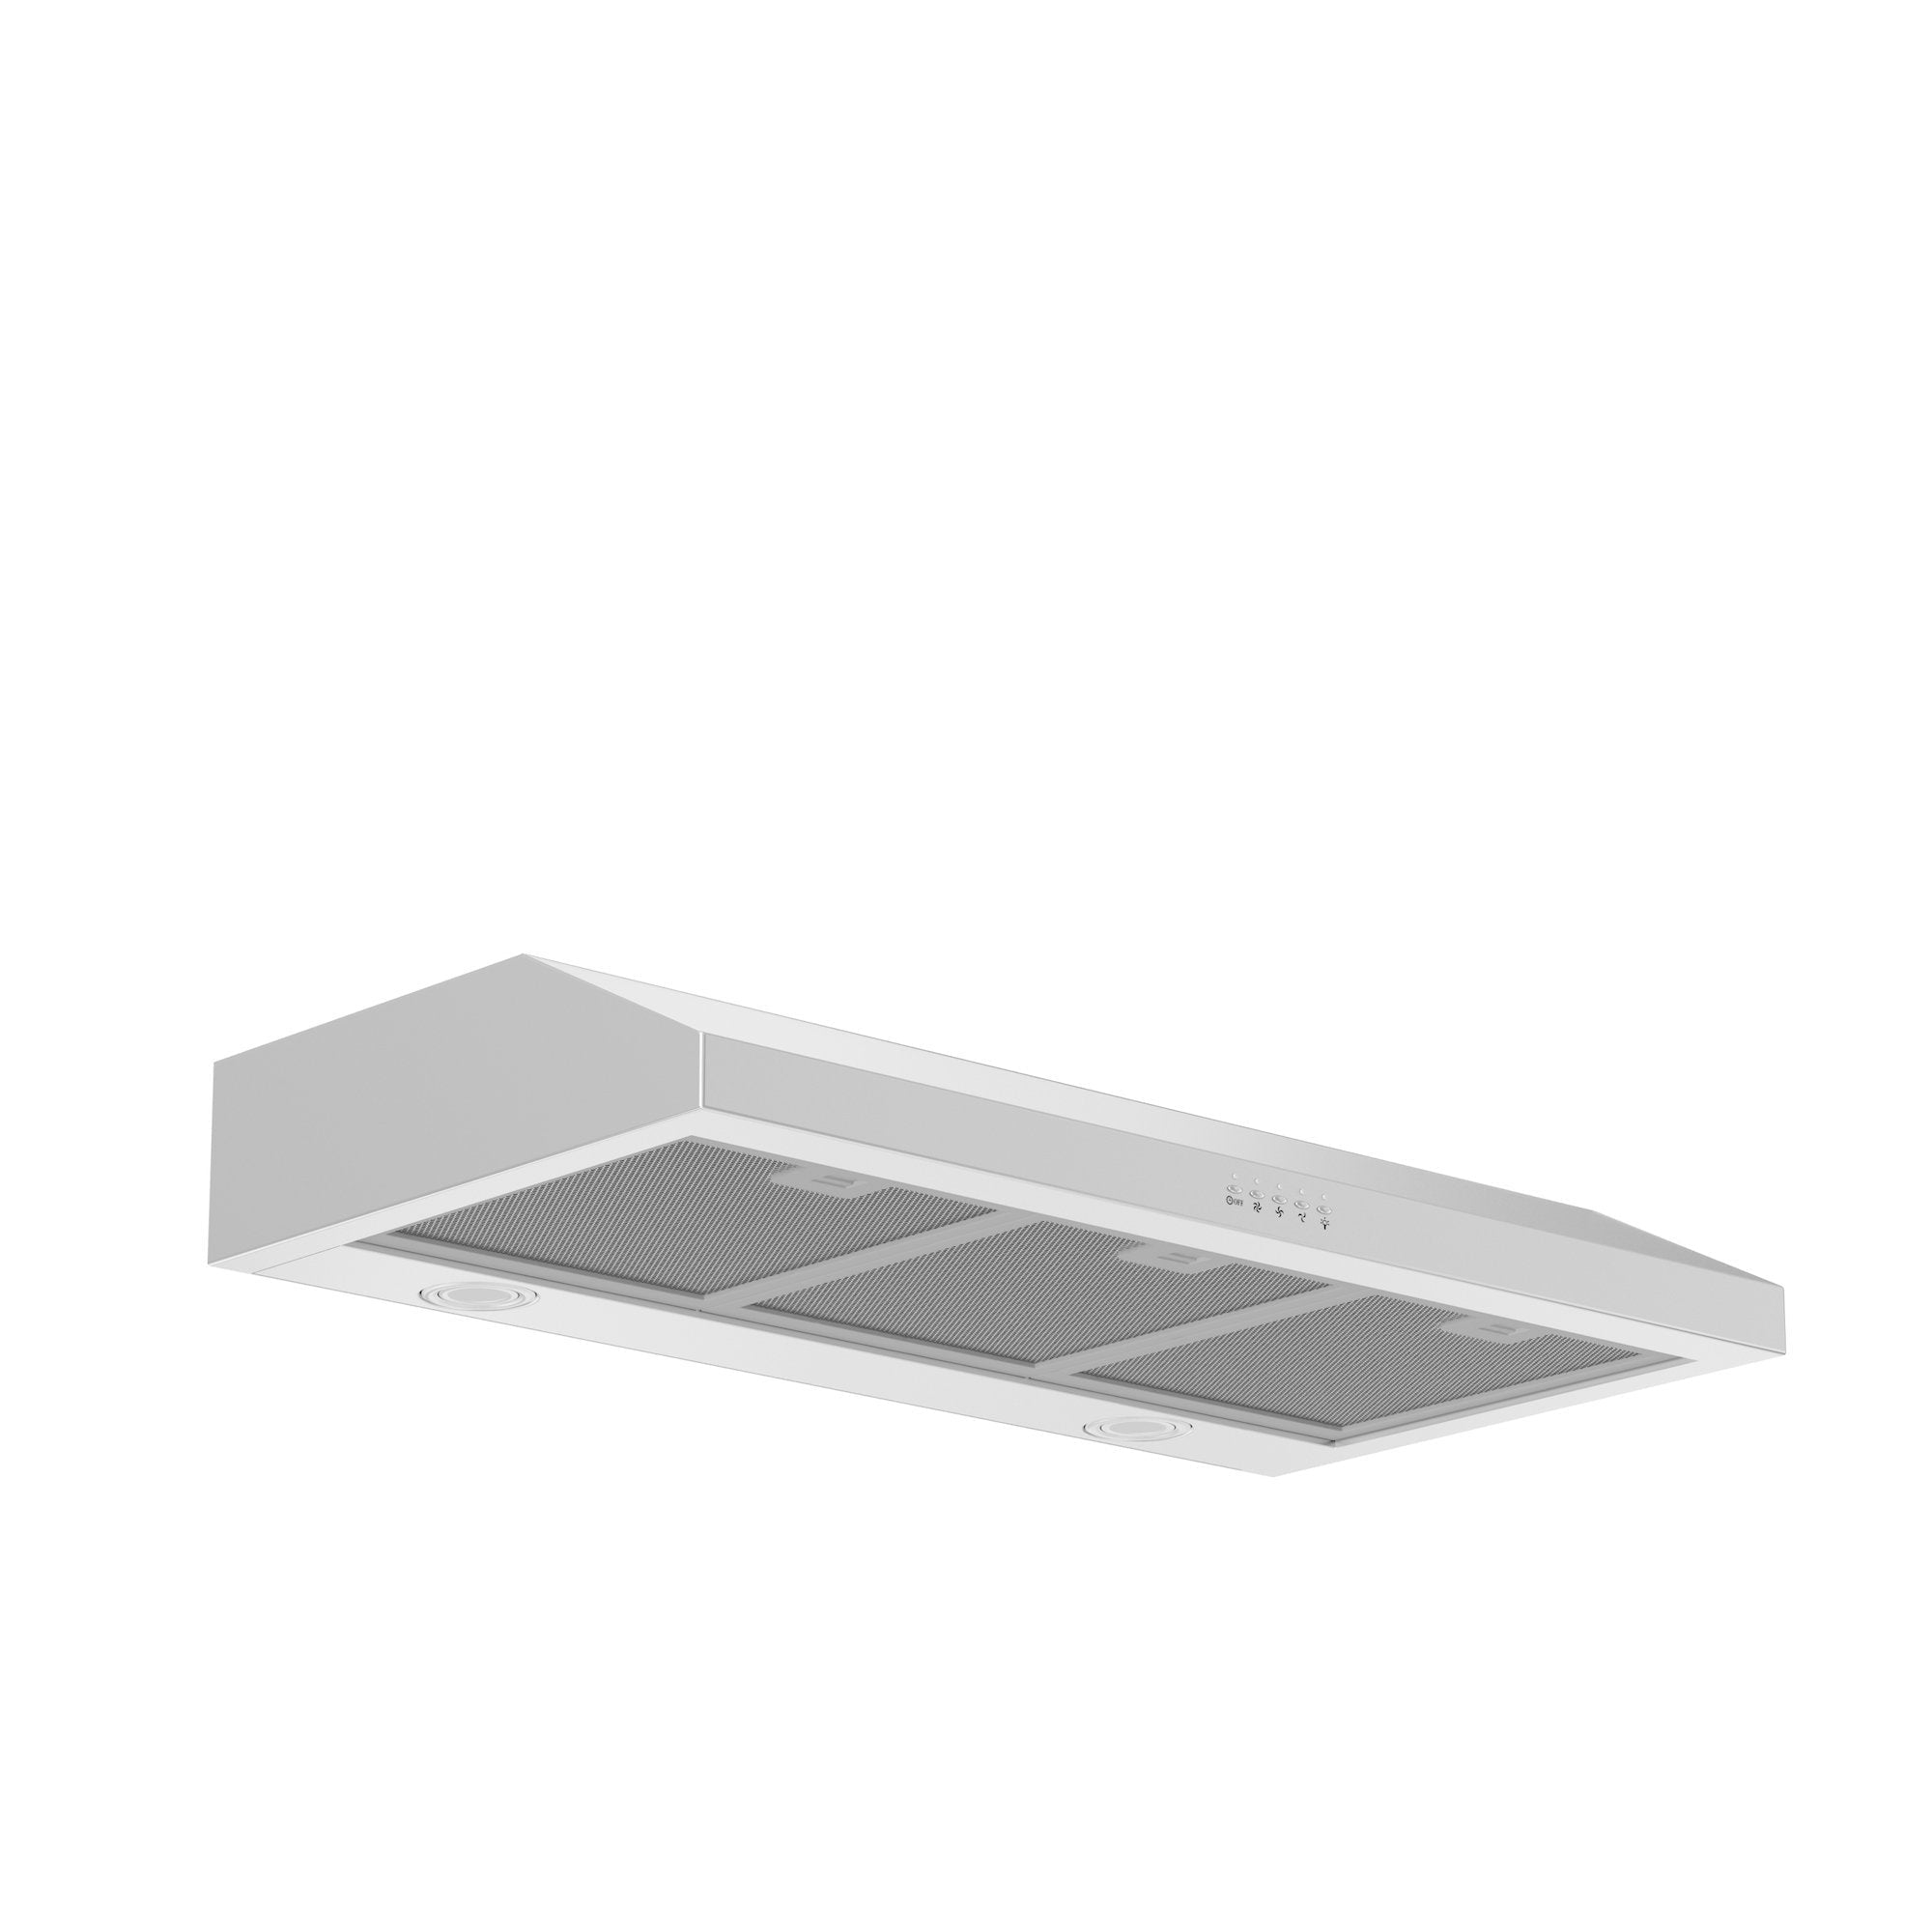 ZLINE 30 inch 280 CFM Ducted Under Cabinet Range Hood in Stainless Steel - Hardwired Power (615-30) - New Star Living